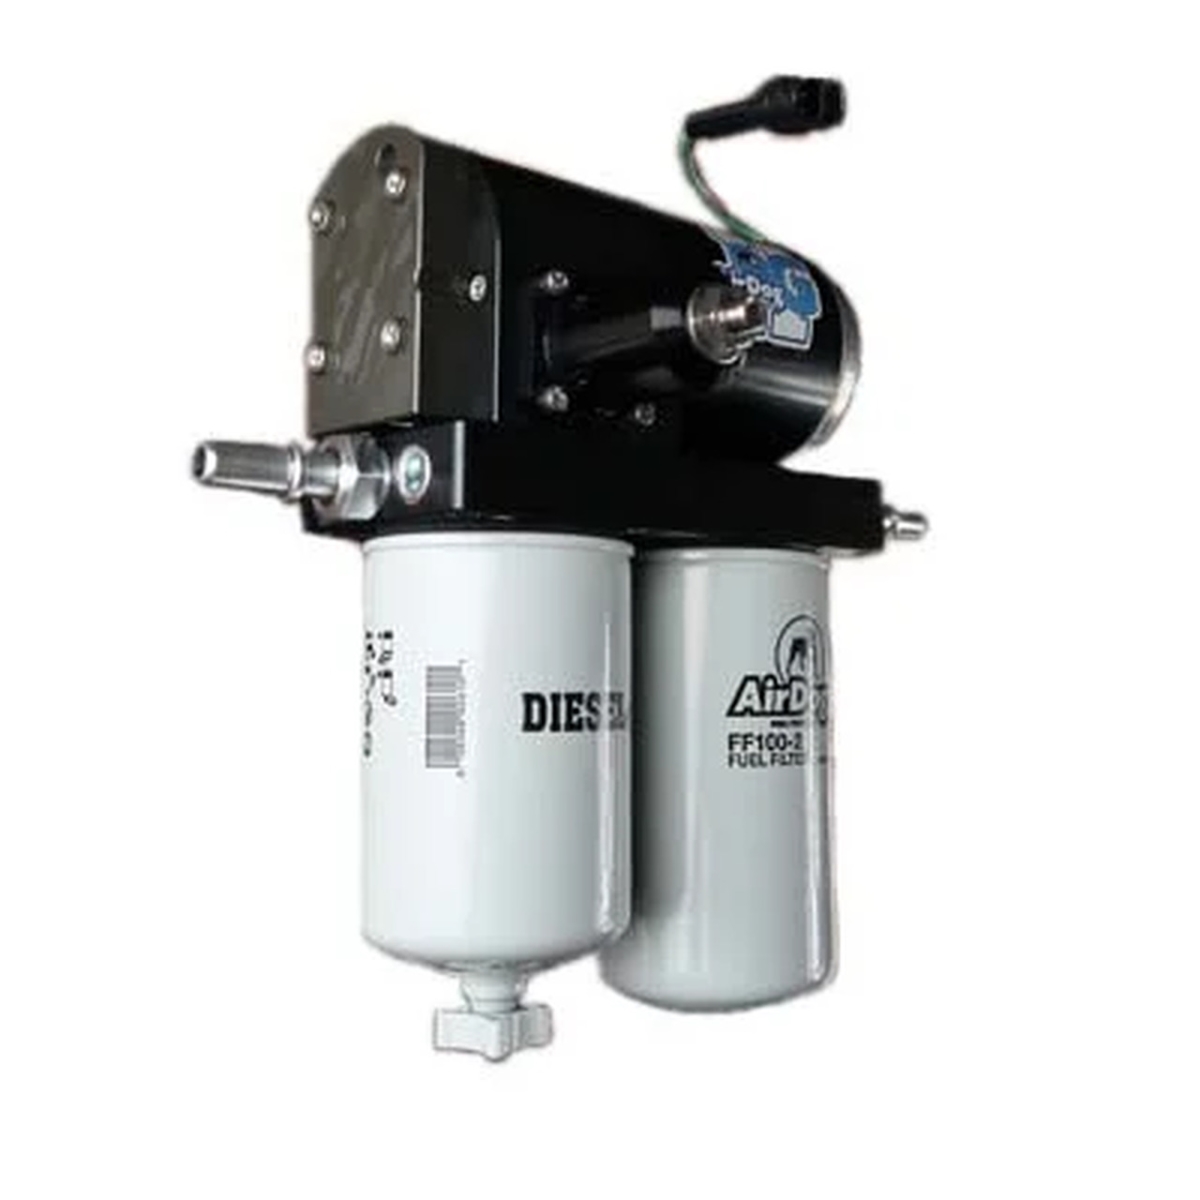 Picture of AirDog & Diesel Rx ADGA7SABF592 II-5G DF-165-5G Air & Fuel Separation System for 1999-2003 Ford 7.3L